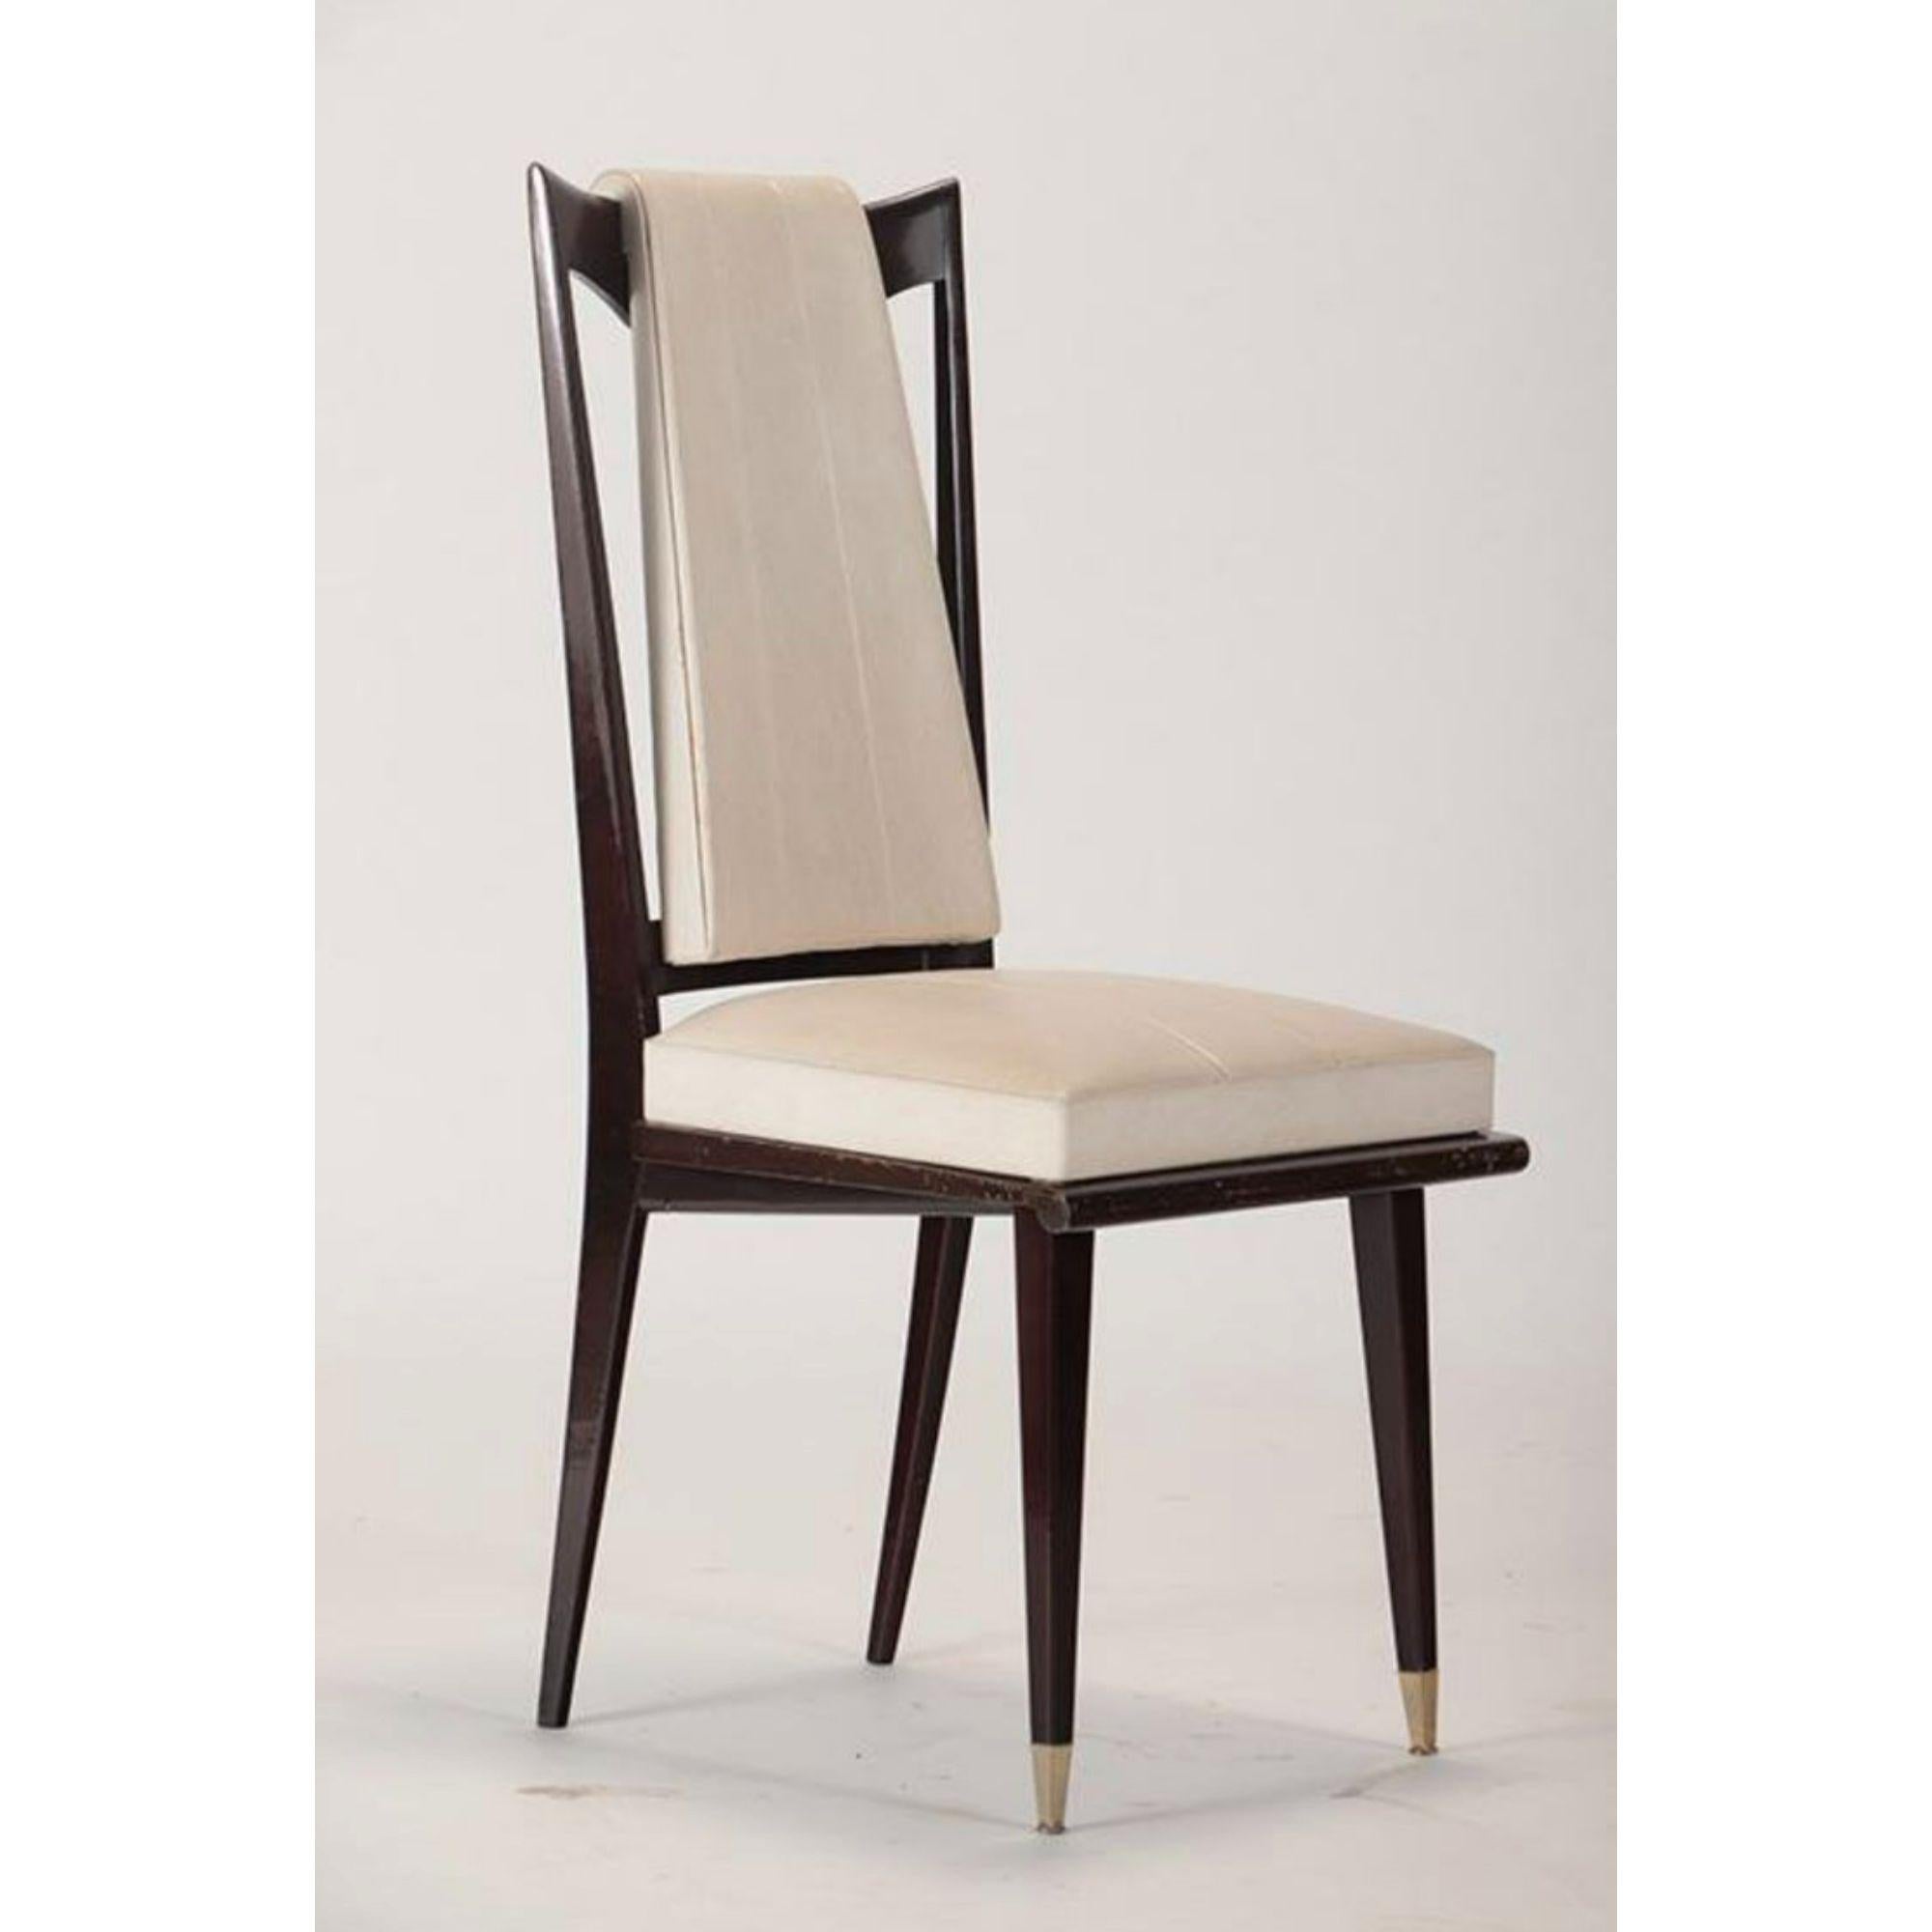 Set of six mid-century French wood and upholstered dining chairs. These stylish chairs are crafted in mahogany wood frames and are upholstered in an off-white vinyl with brass caps on the front tapered legs.